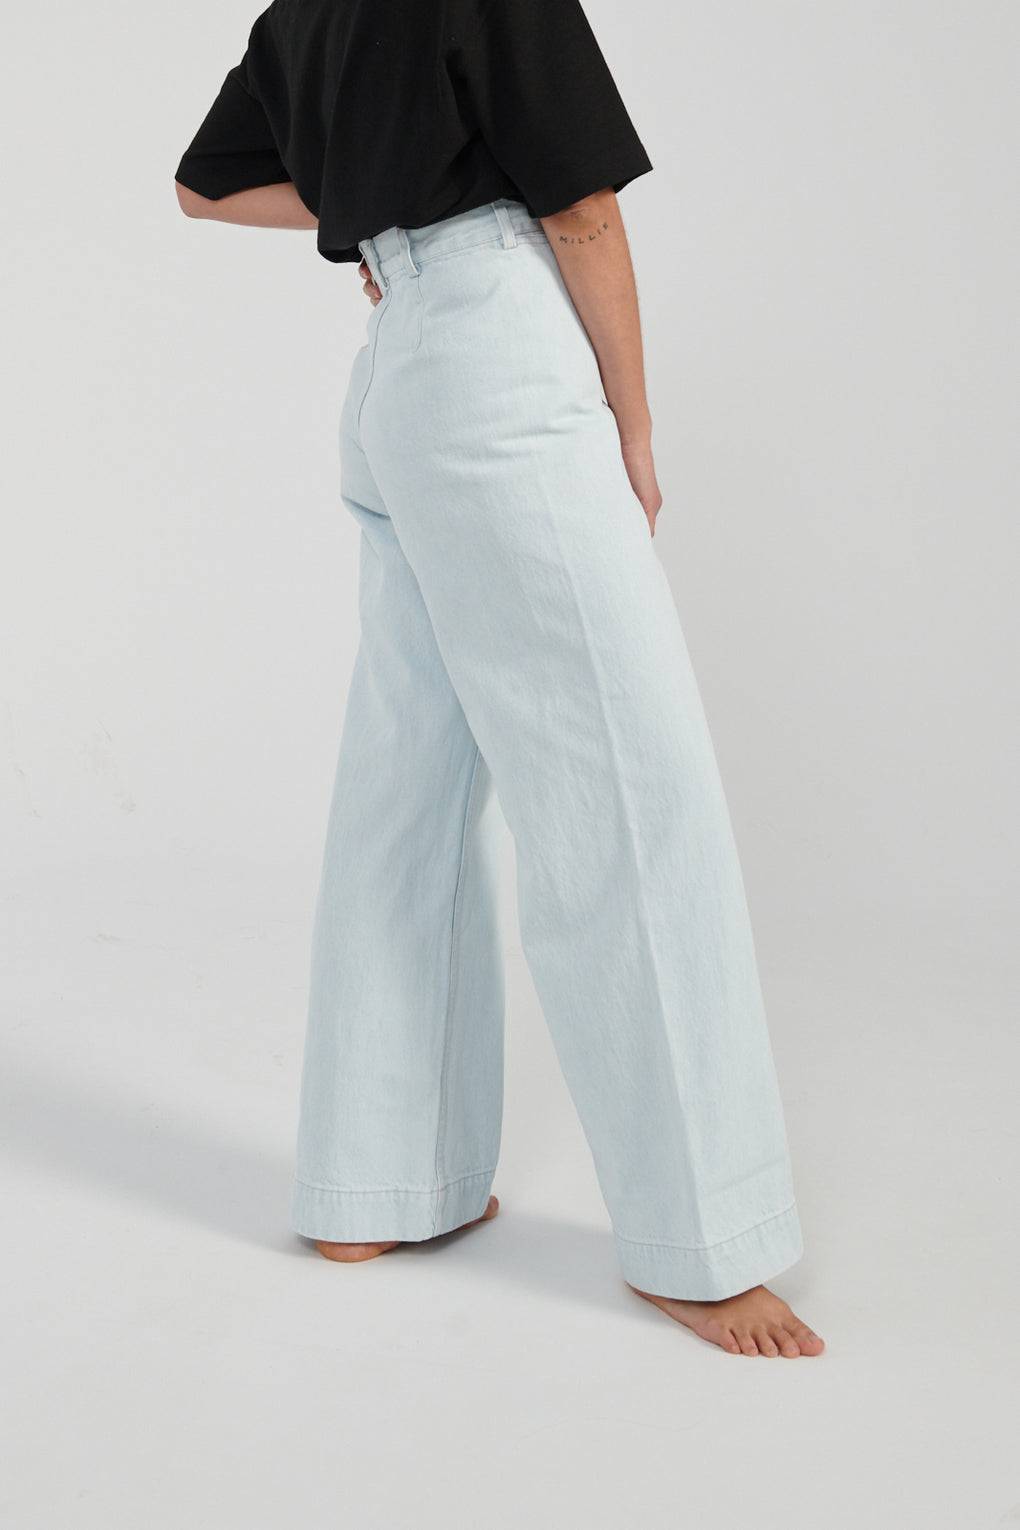 The Sailor Pant in Denim - Brass Clothing